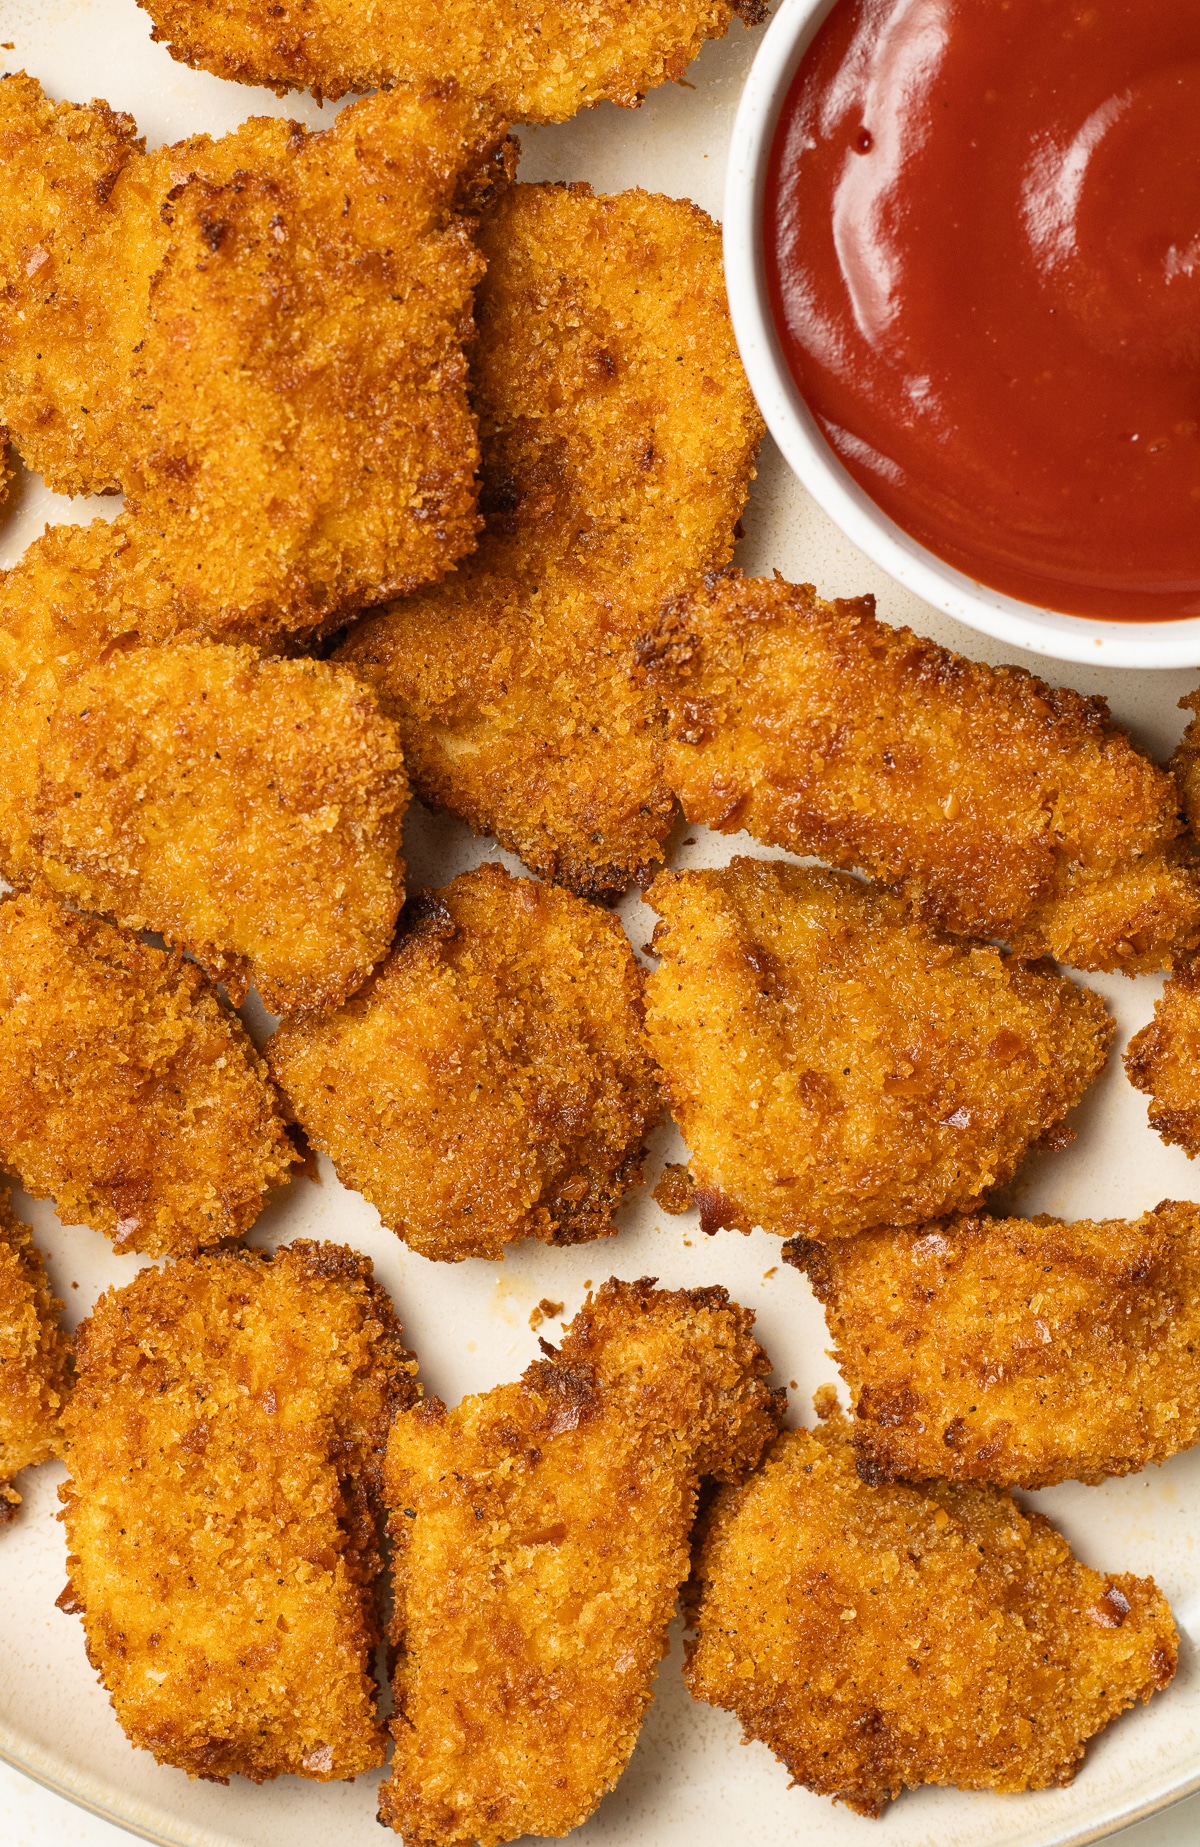 Chicken nuggets on a plate with a bowl of ketchup.